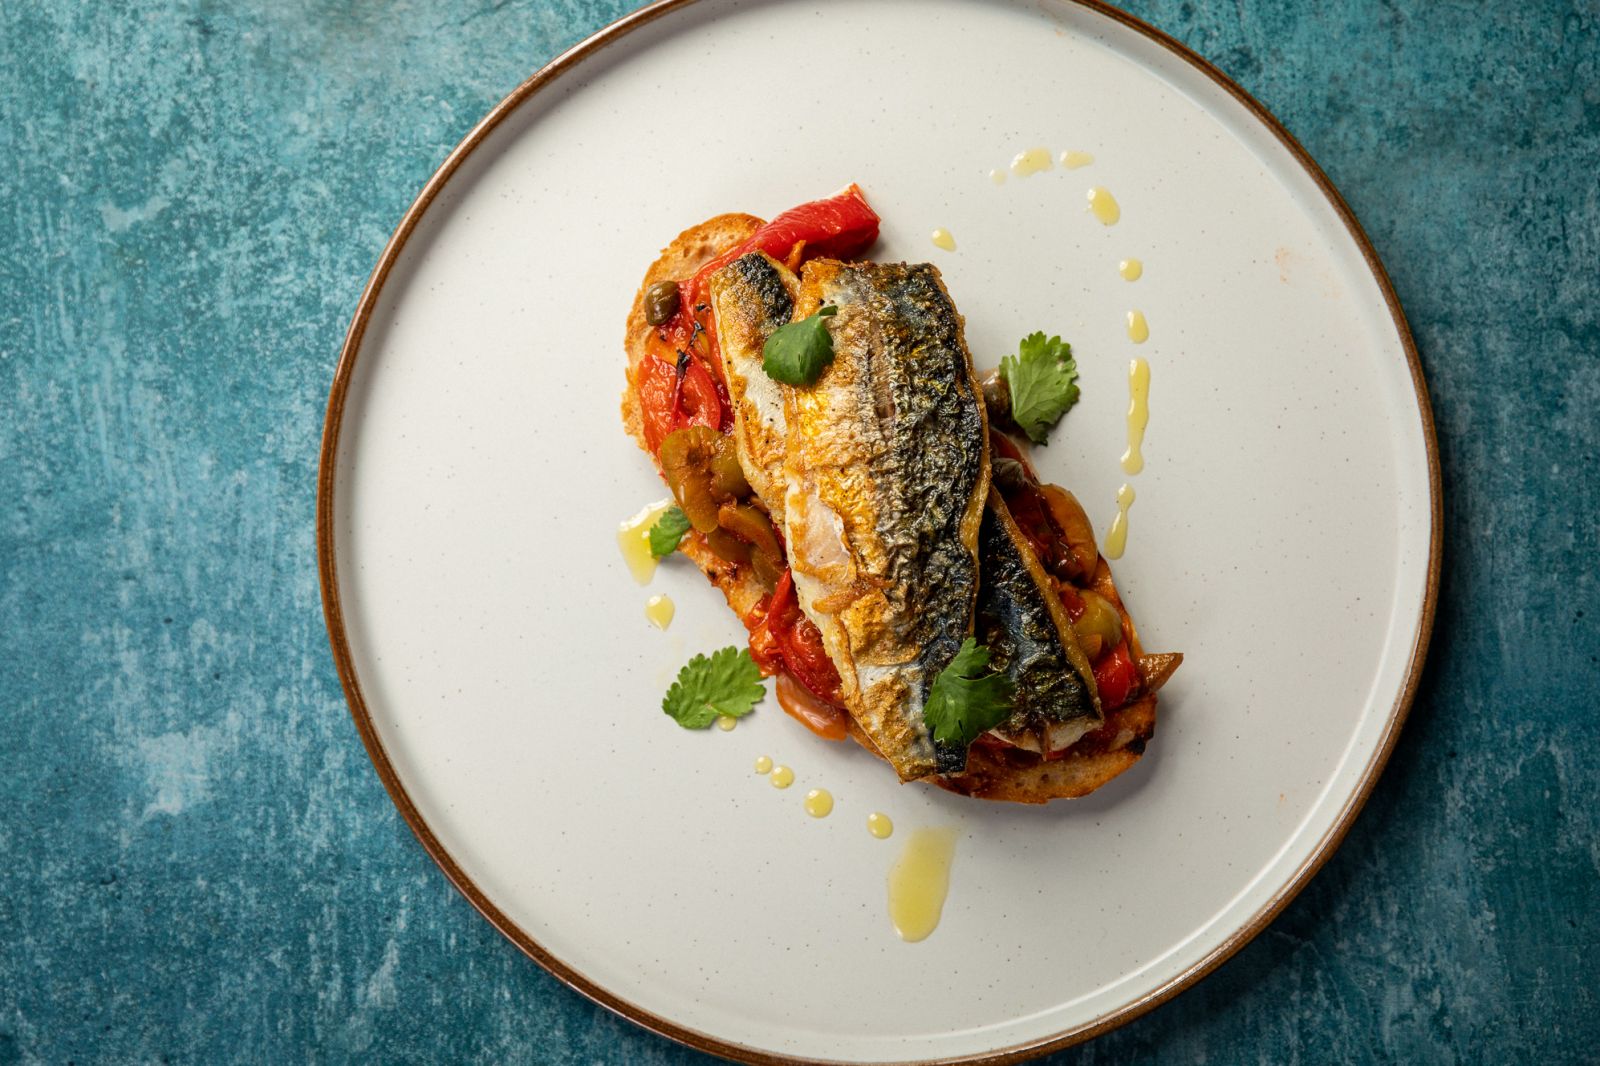 Pan fried mackerel with pepperonata, Photo by Mike Searle